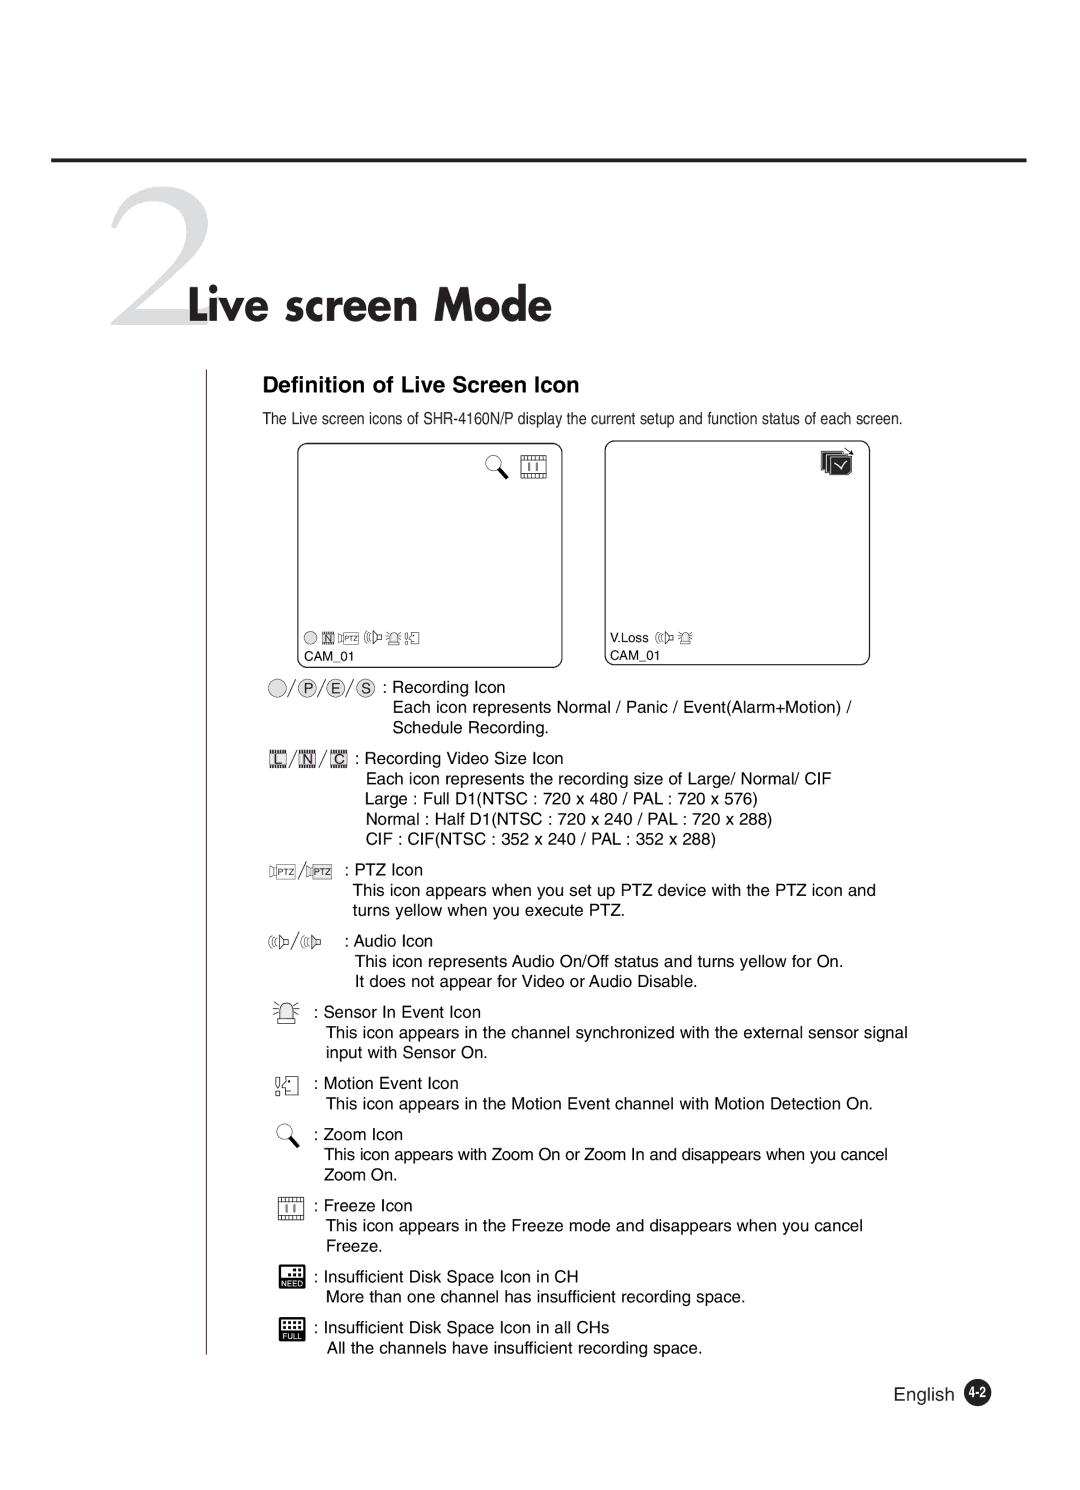 Samsung SHR-4160P manual 2Live screen Mode, Definition of Live Screen Icon 